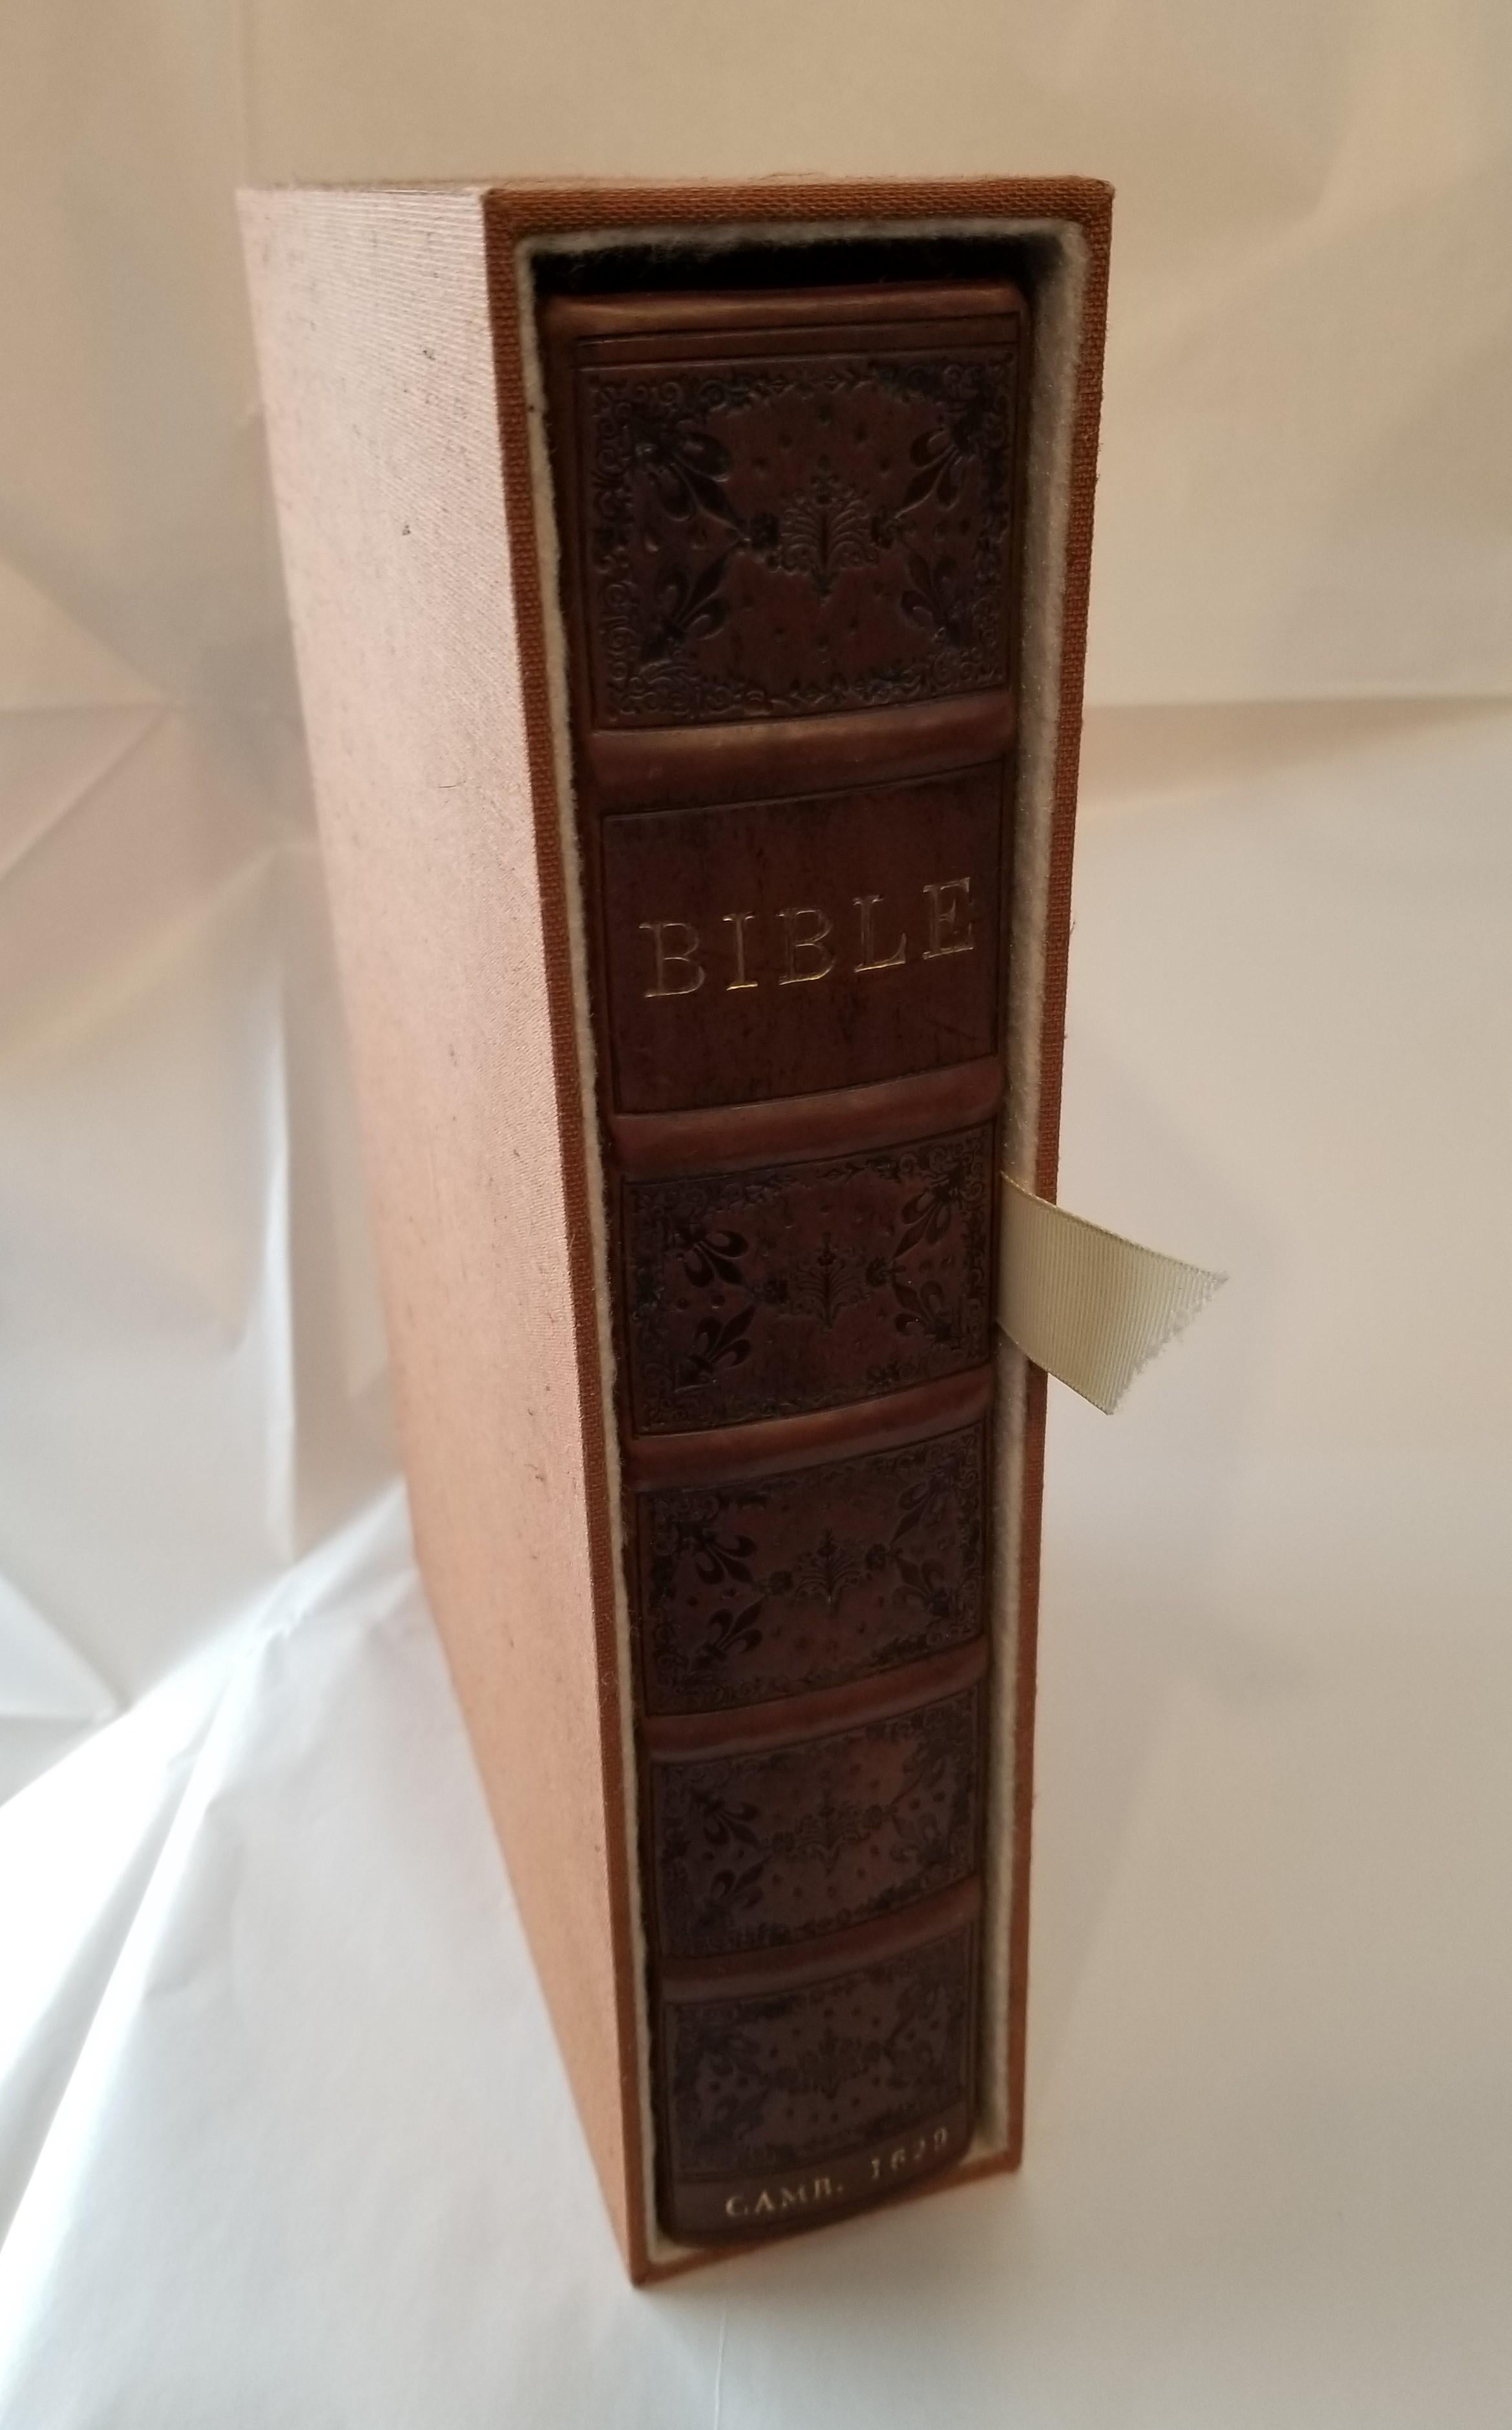 1629 Complete Cambridge Bible King James First Edition Folio Title Engraving For Sale 11